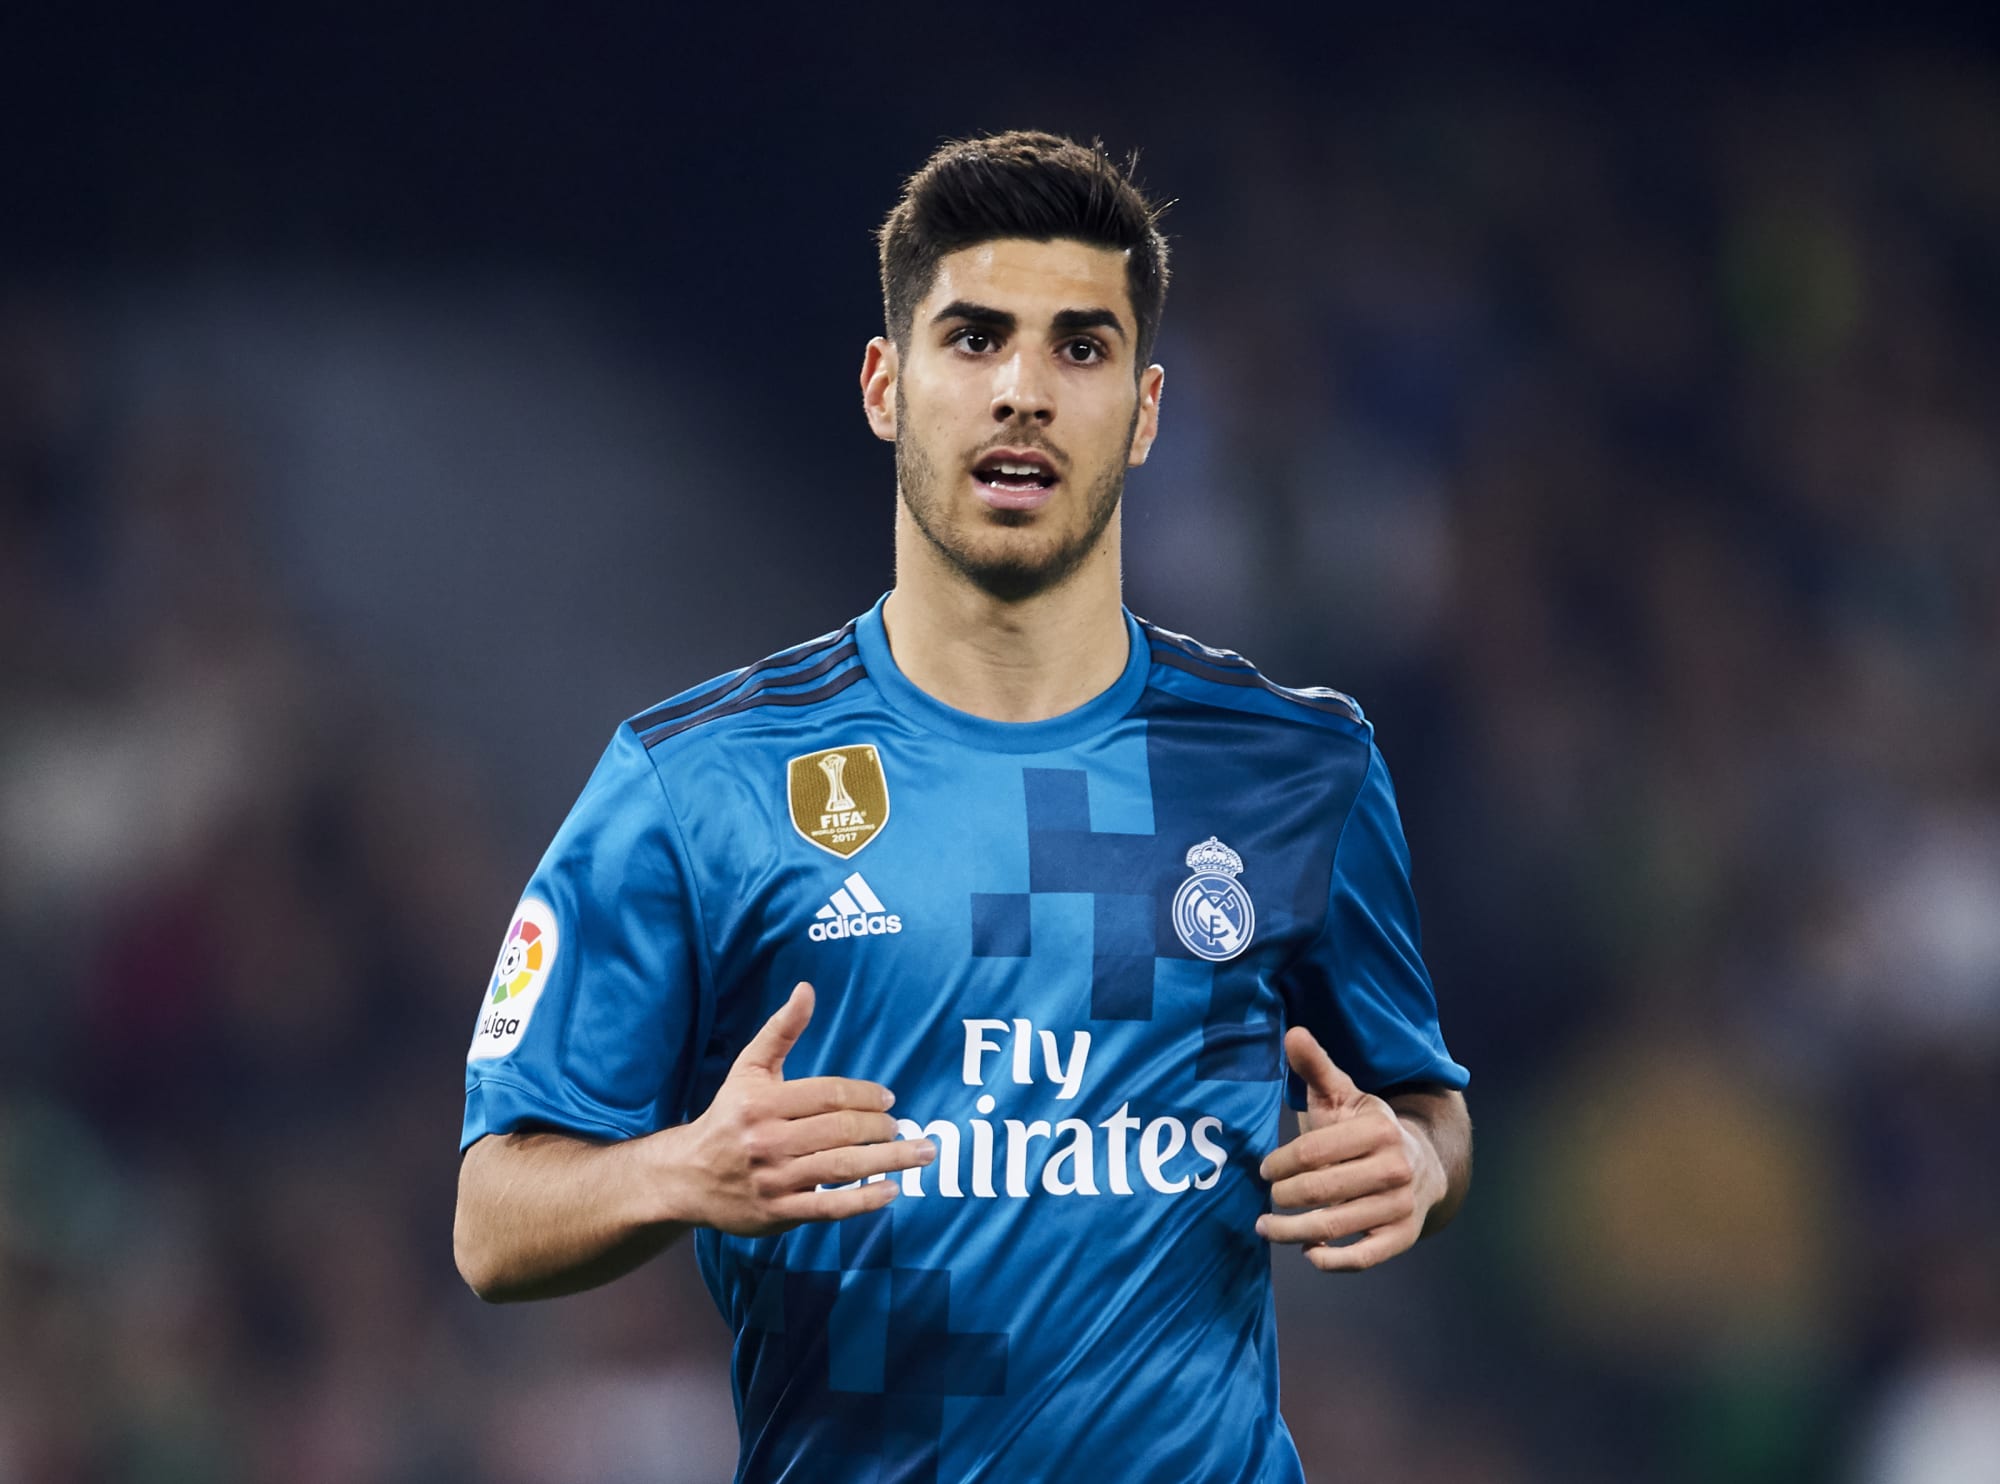 Transfer news: Marco Asensio could come to Liverpool